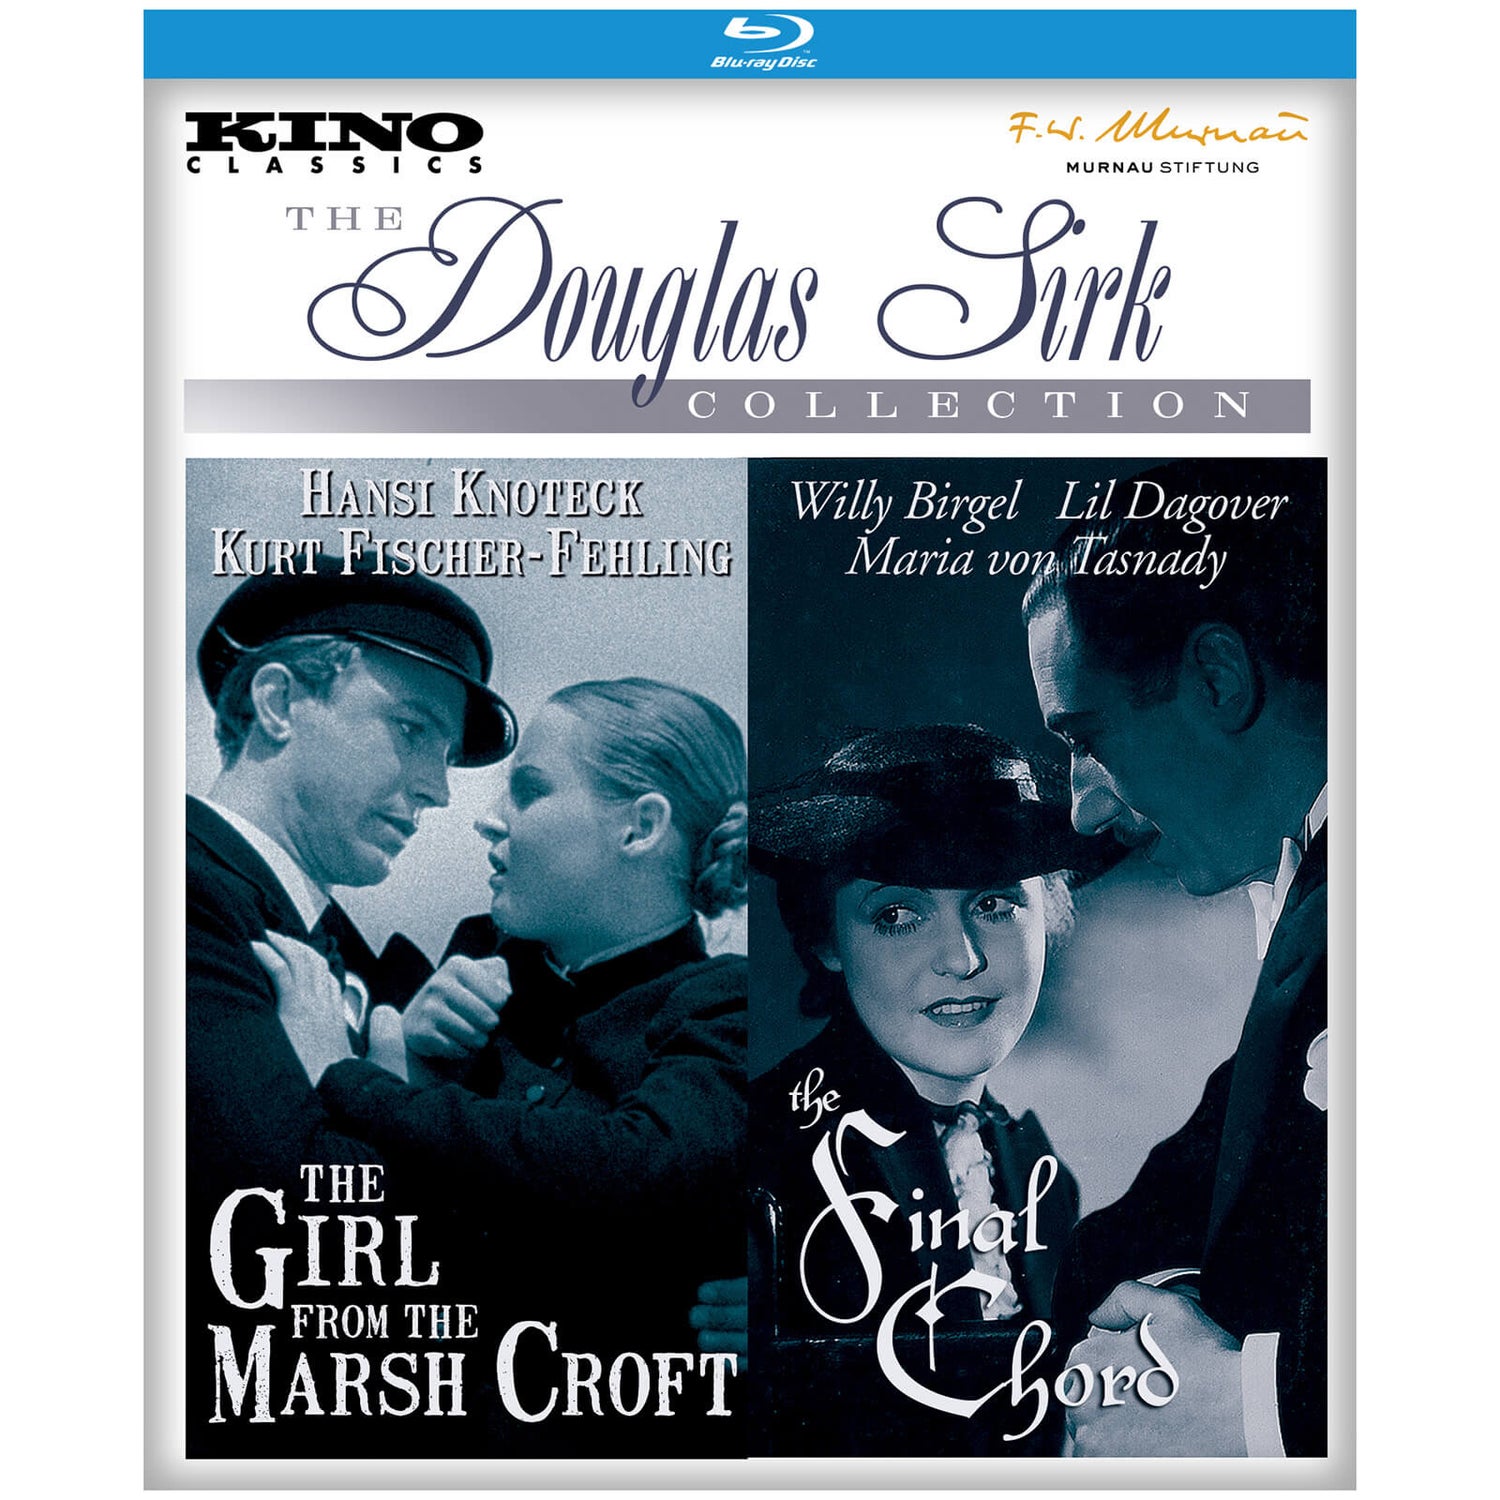 The Girl From The Marsh Croft / Final Chord (US Import)